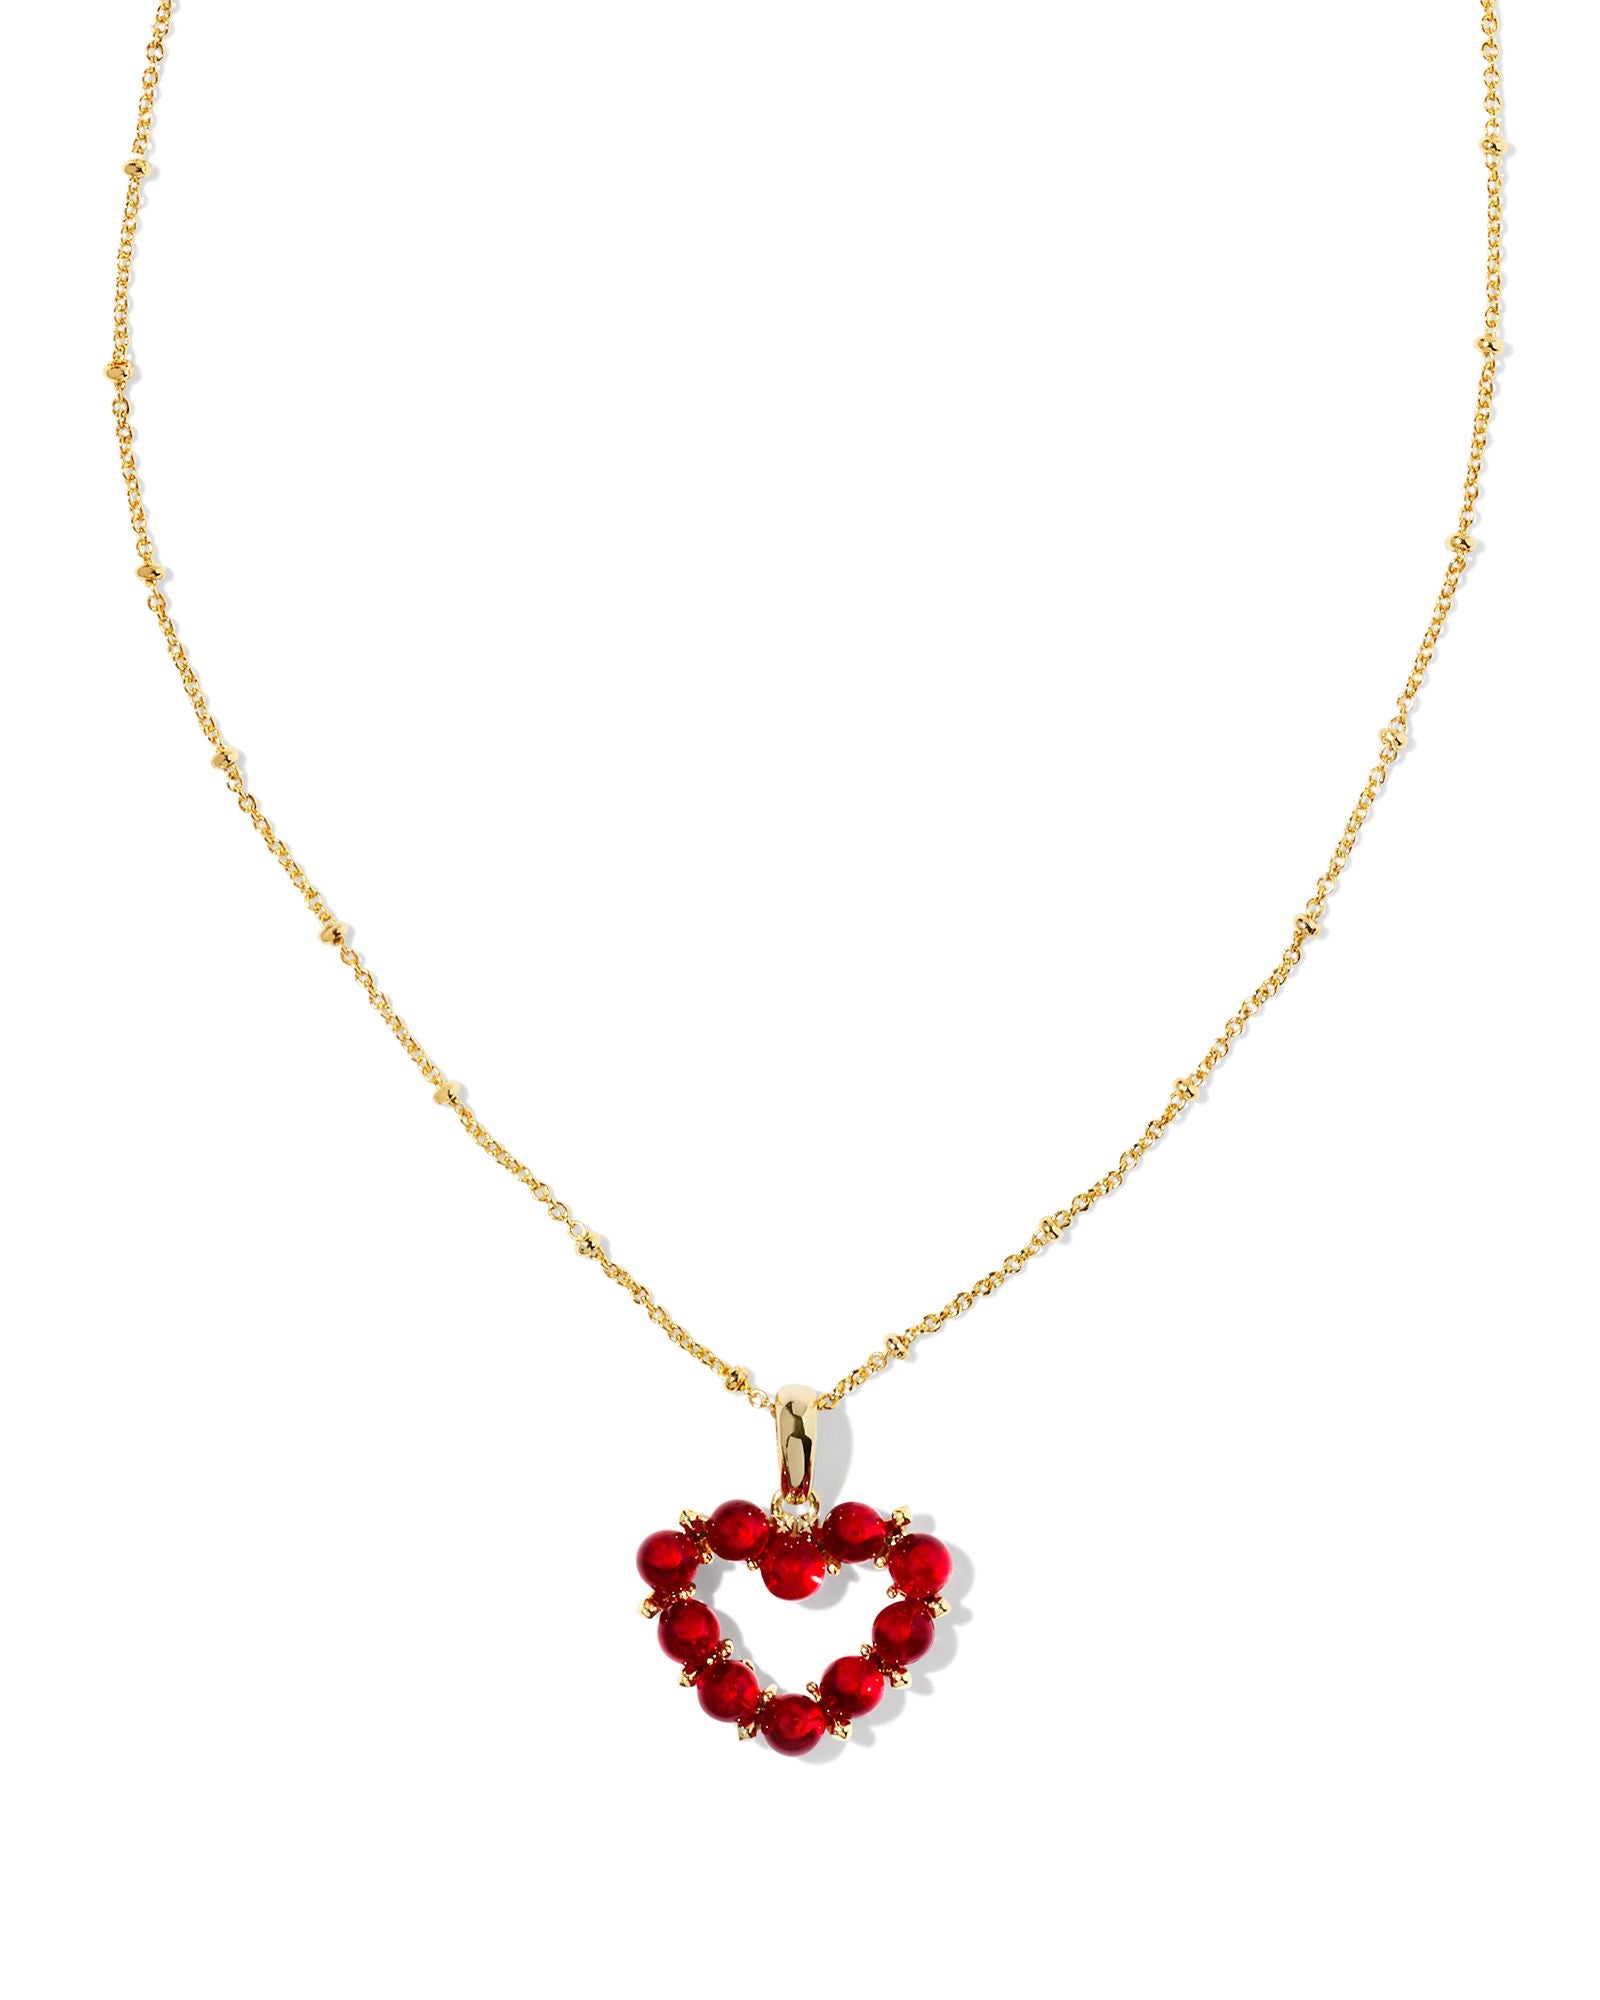 Ashton Heart Pendant Necklace in Gold Red Glass